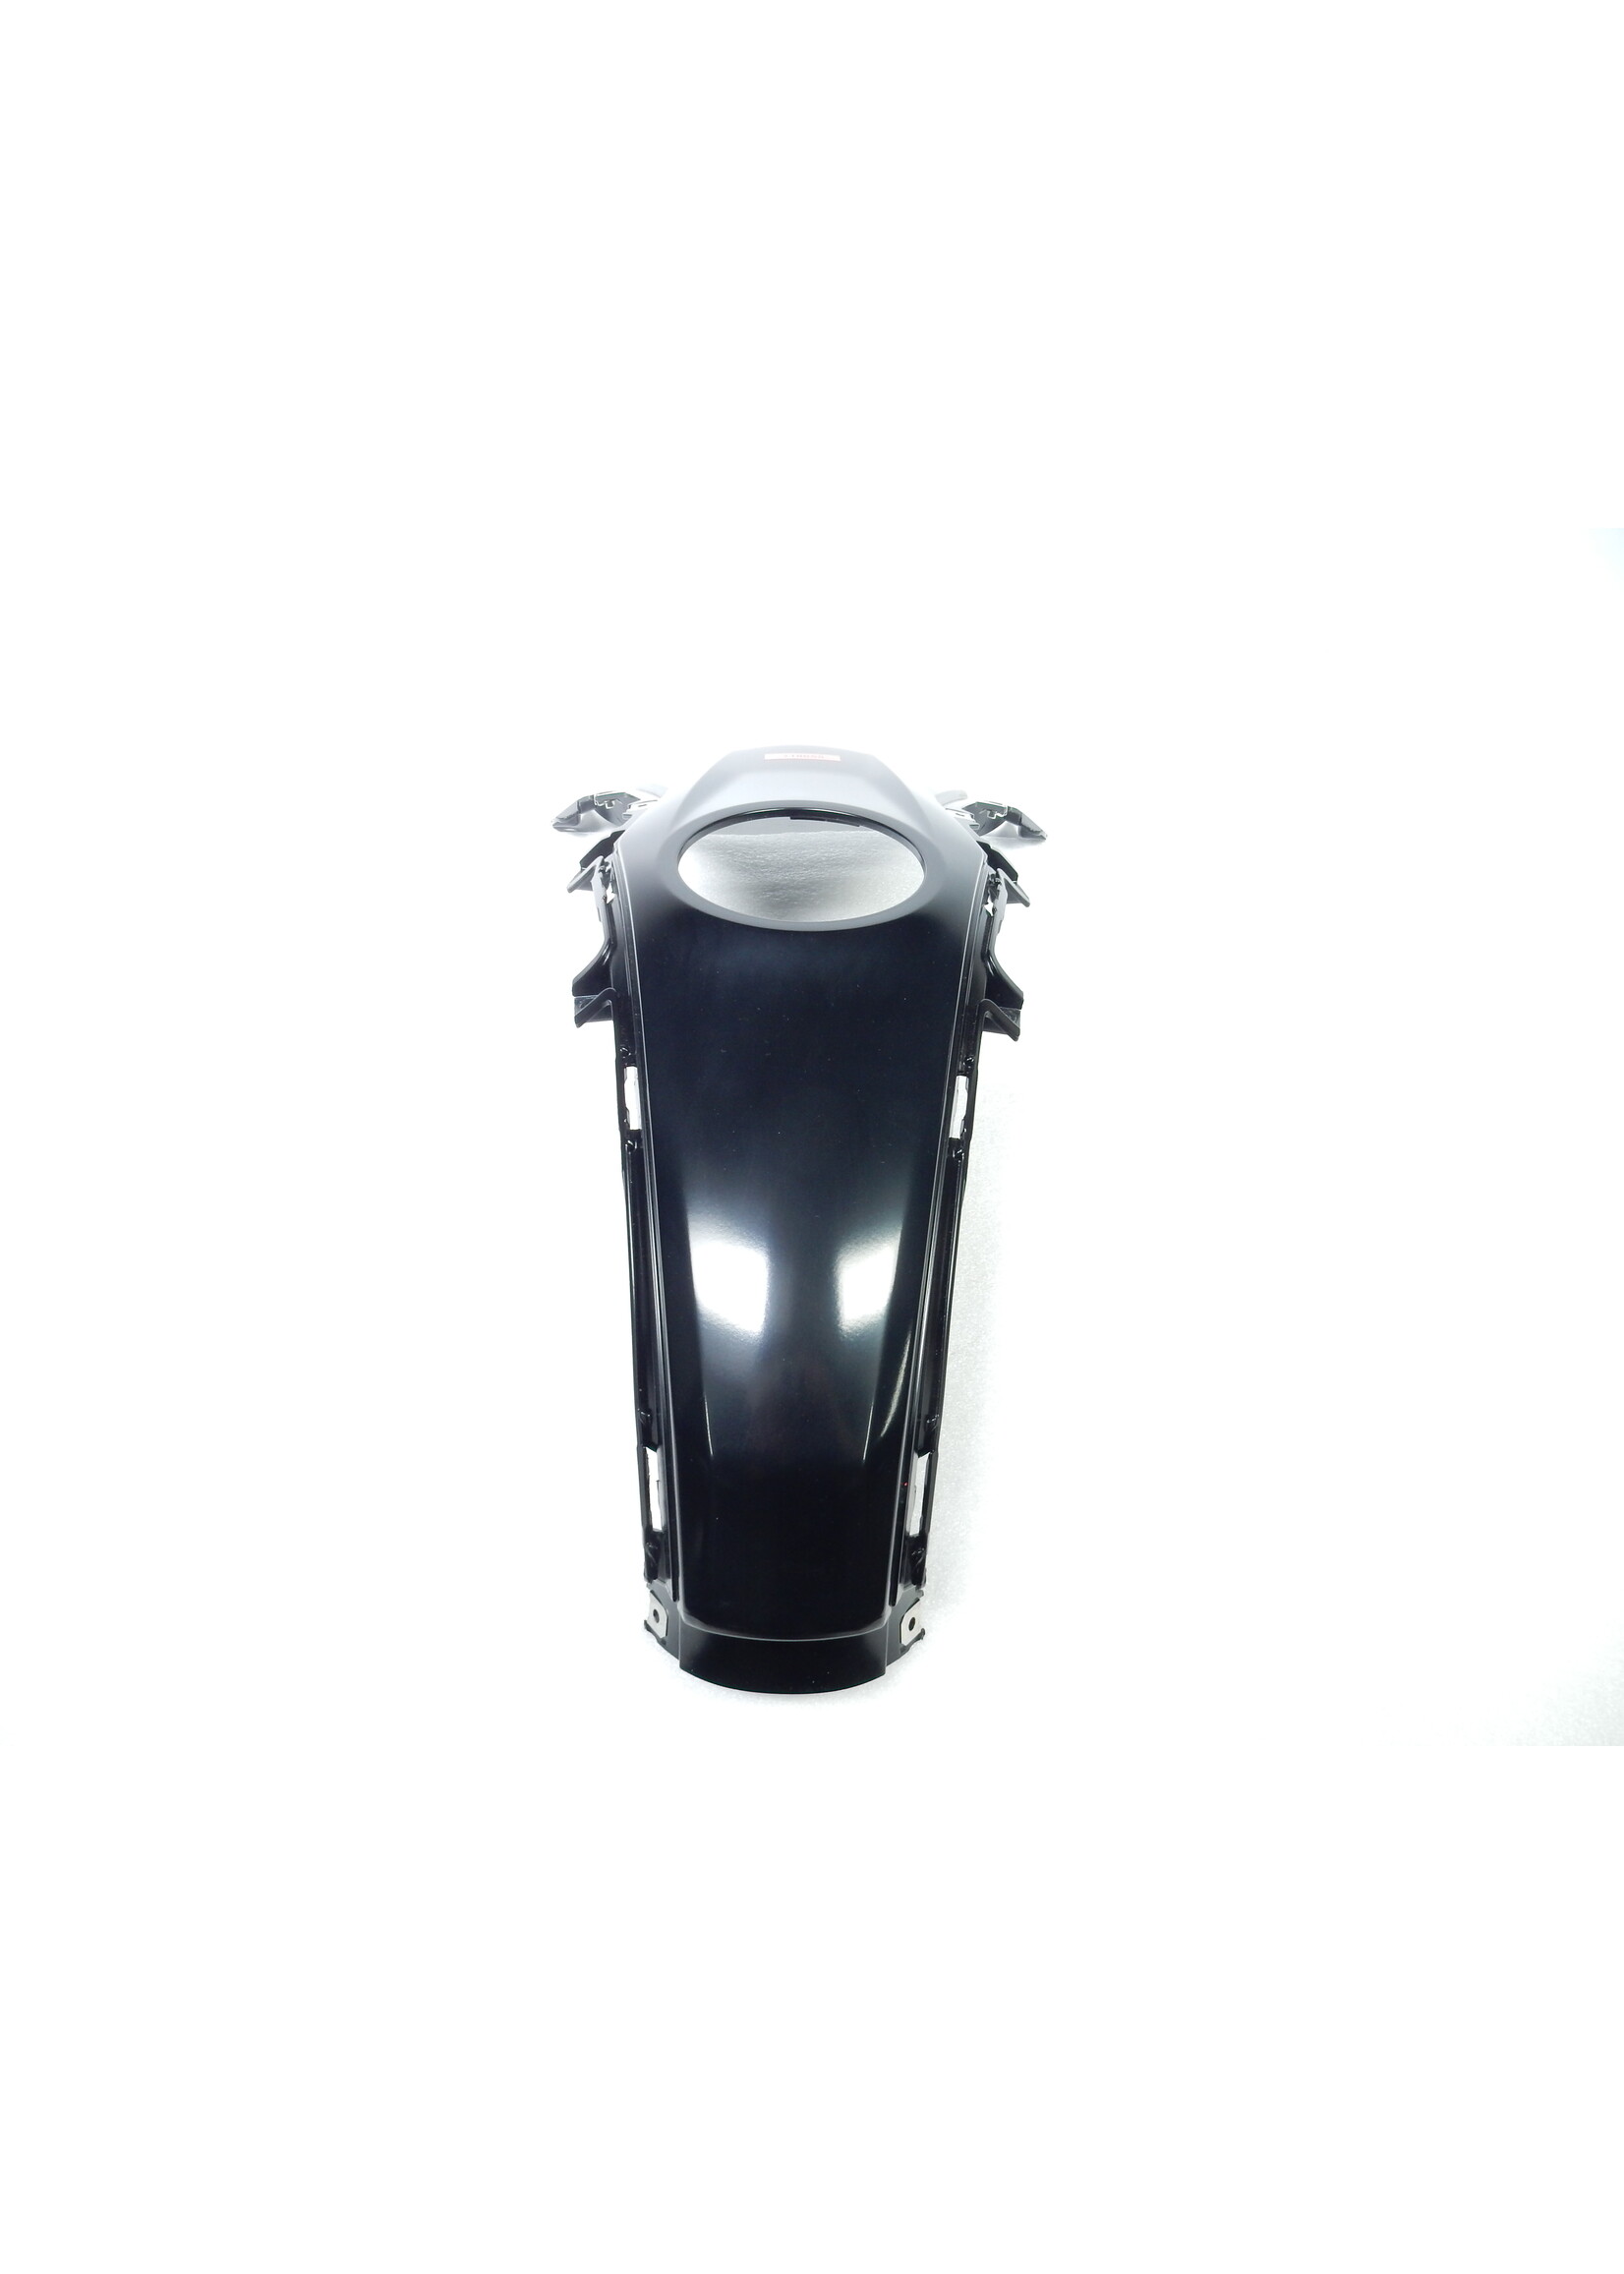 BMW BMW R 1250 RS Tank cover, middle black-storm met. / 46638525027 / 46638534309